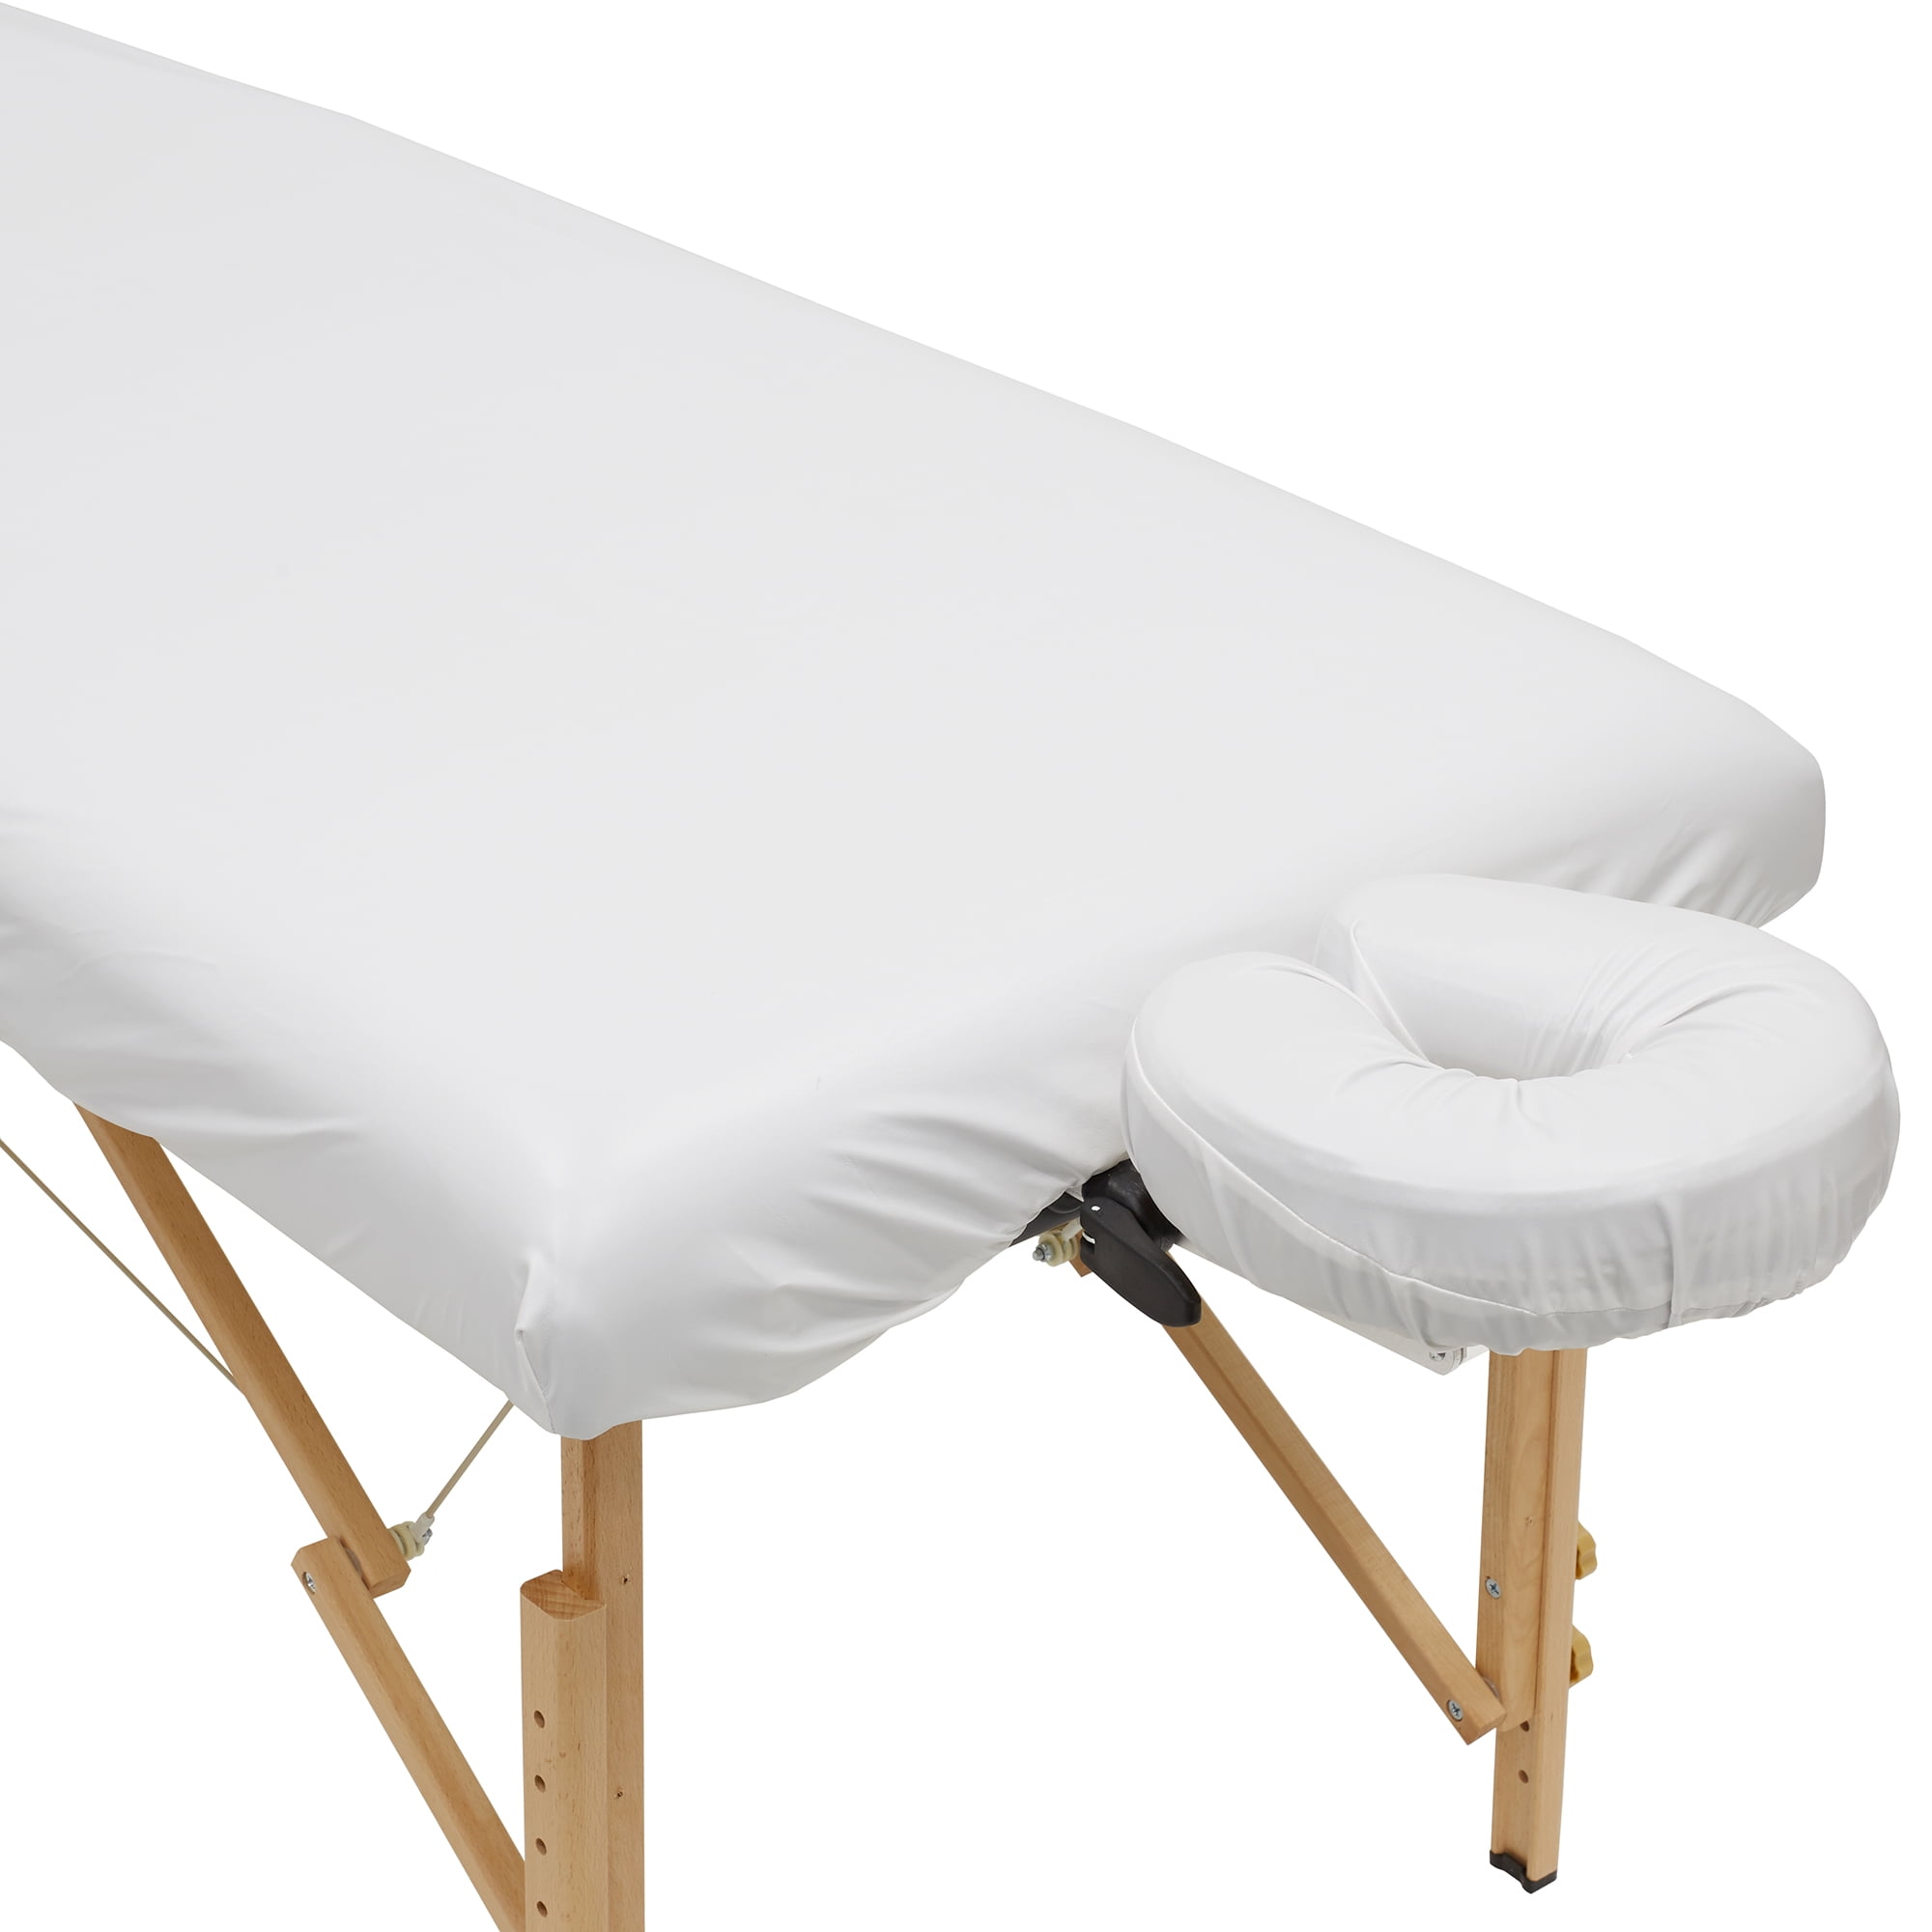 with Hole Waterproof Universal Massage Table Sheet SPA Bed Cover